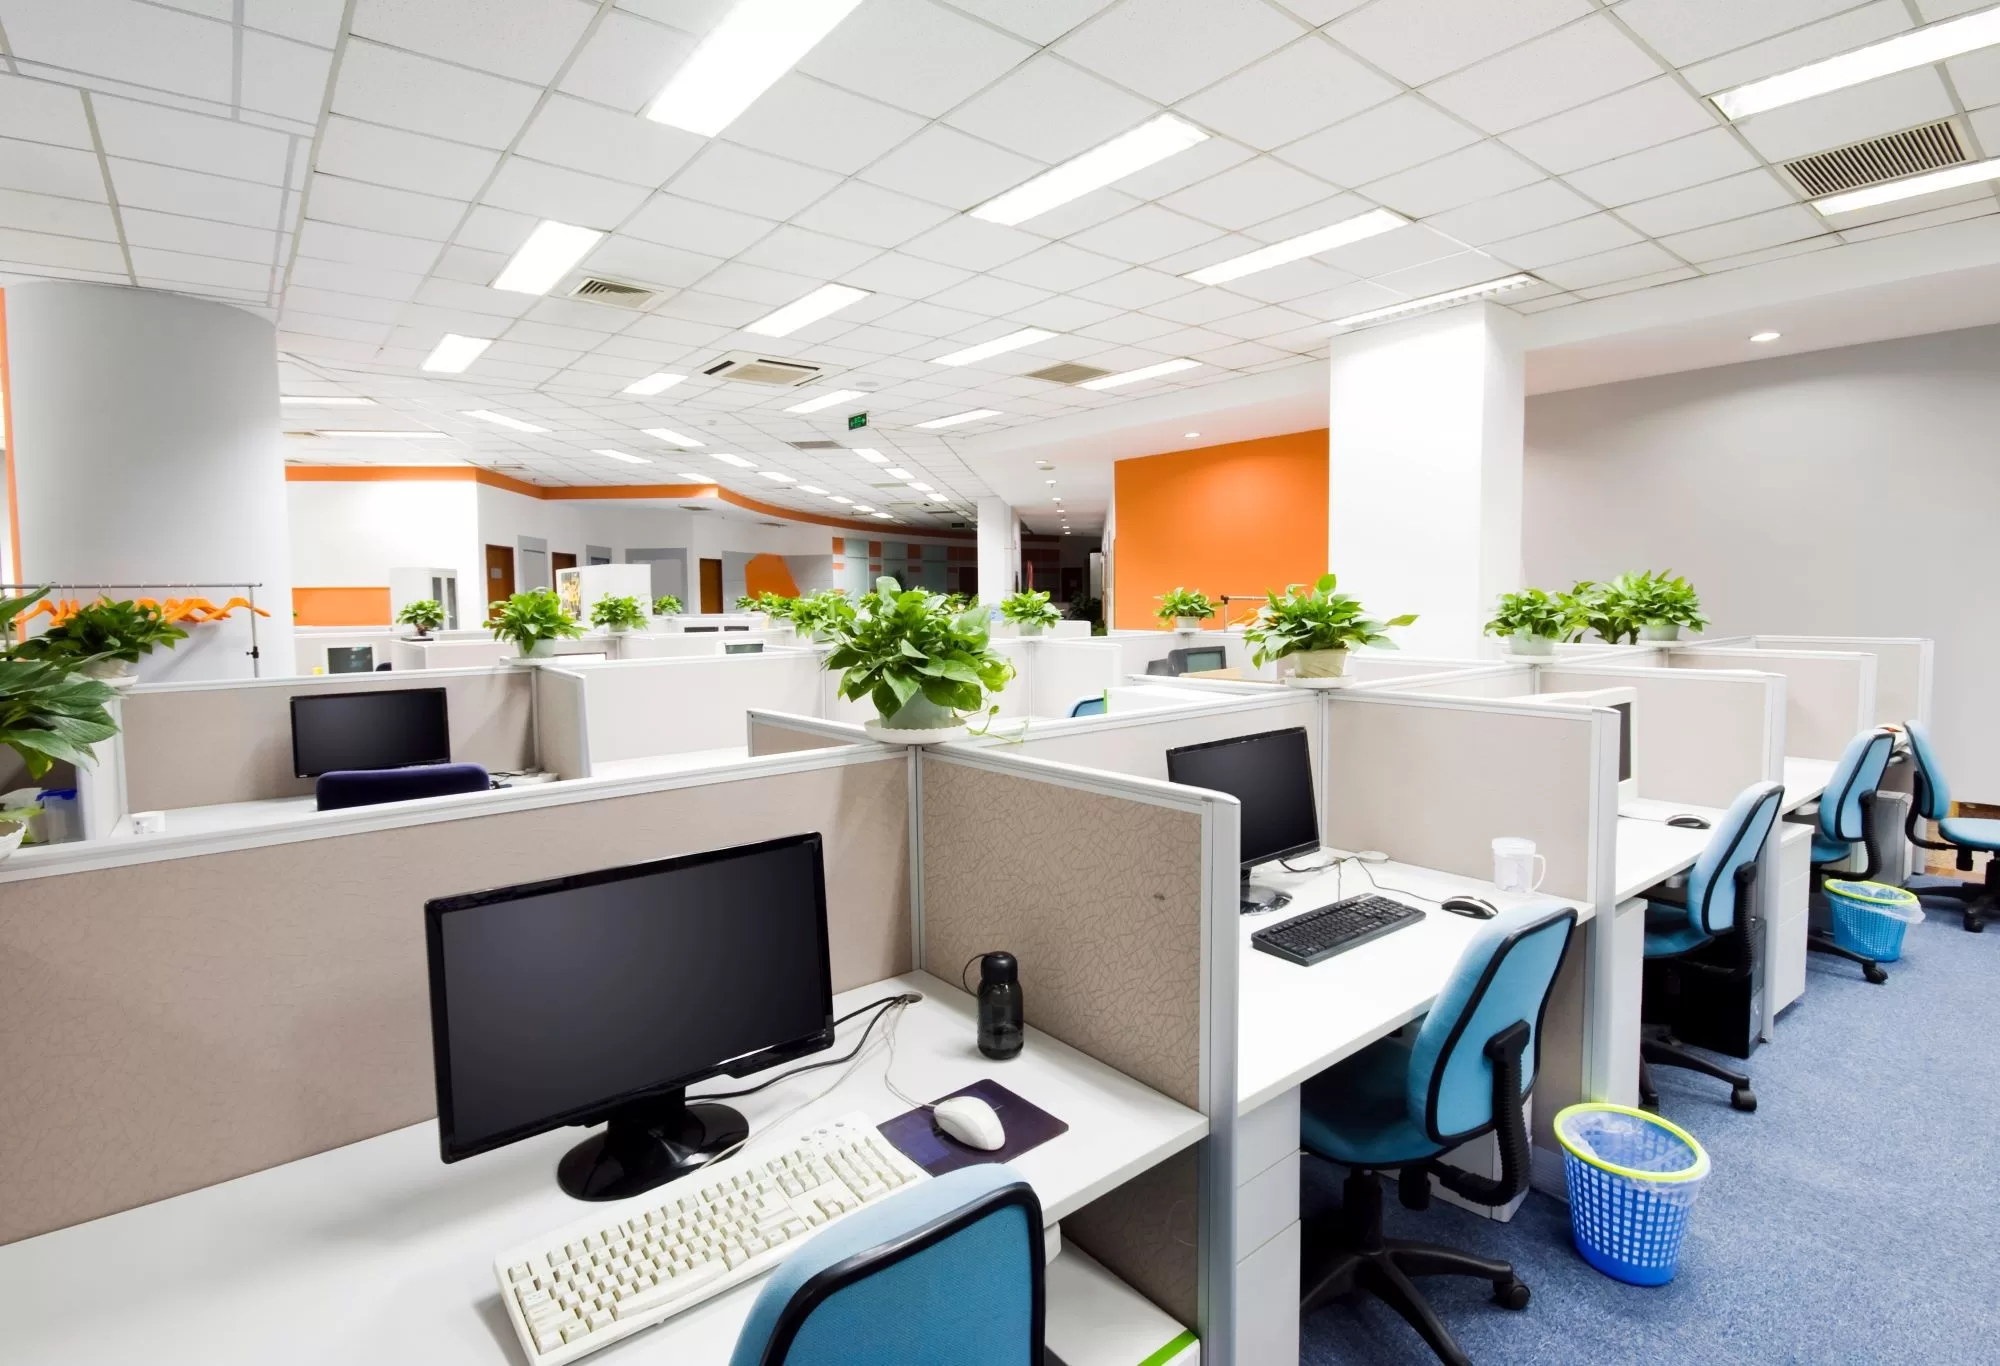 image - 5 Ways to Energize Your Office Space